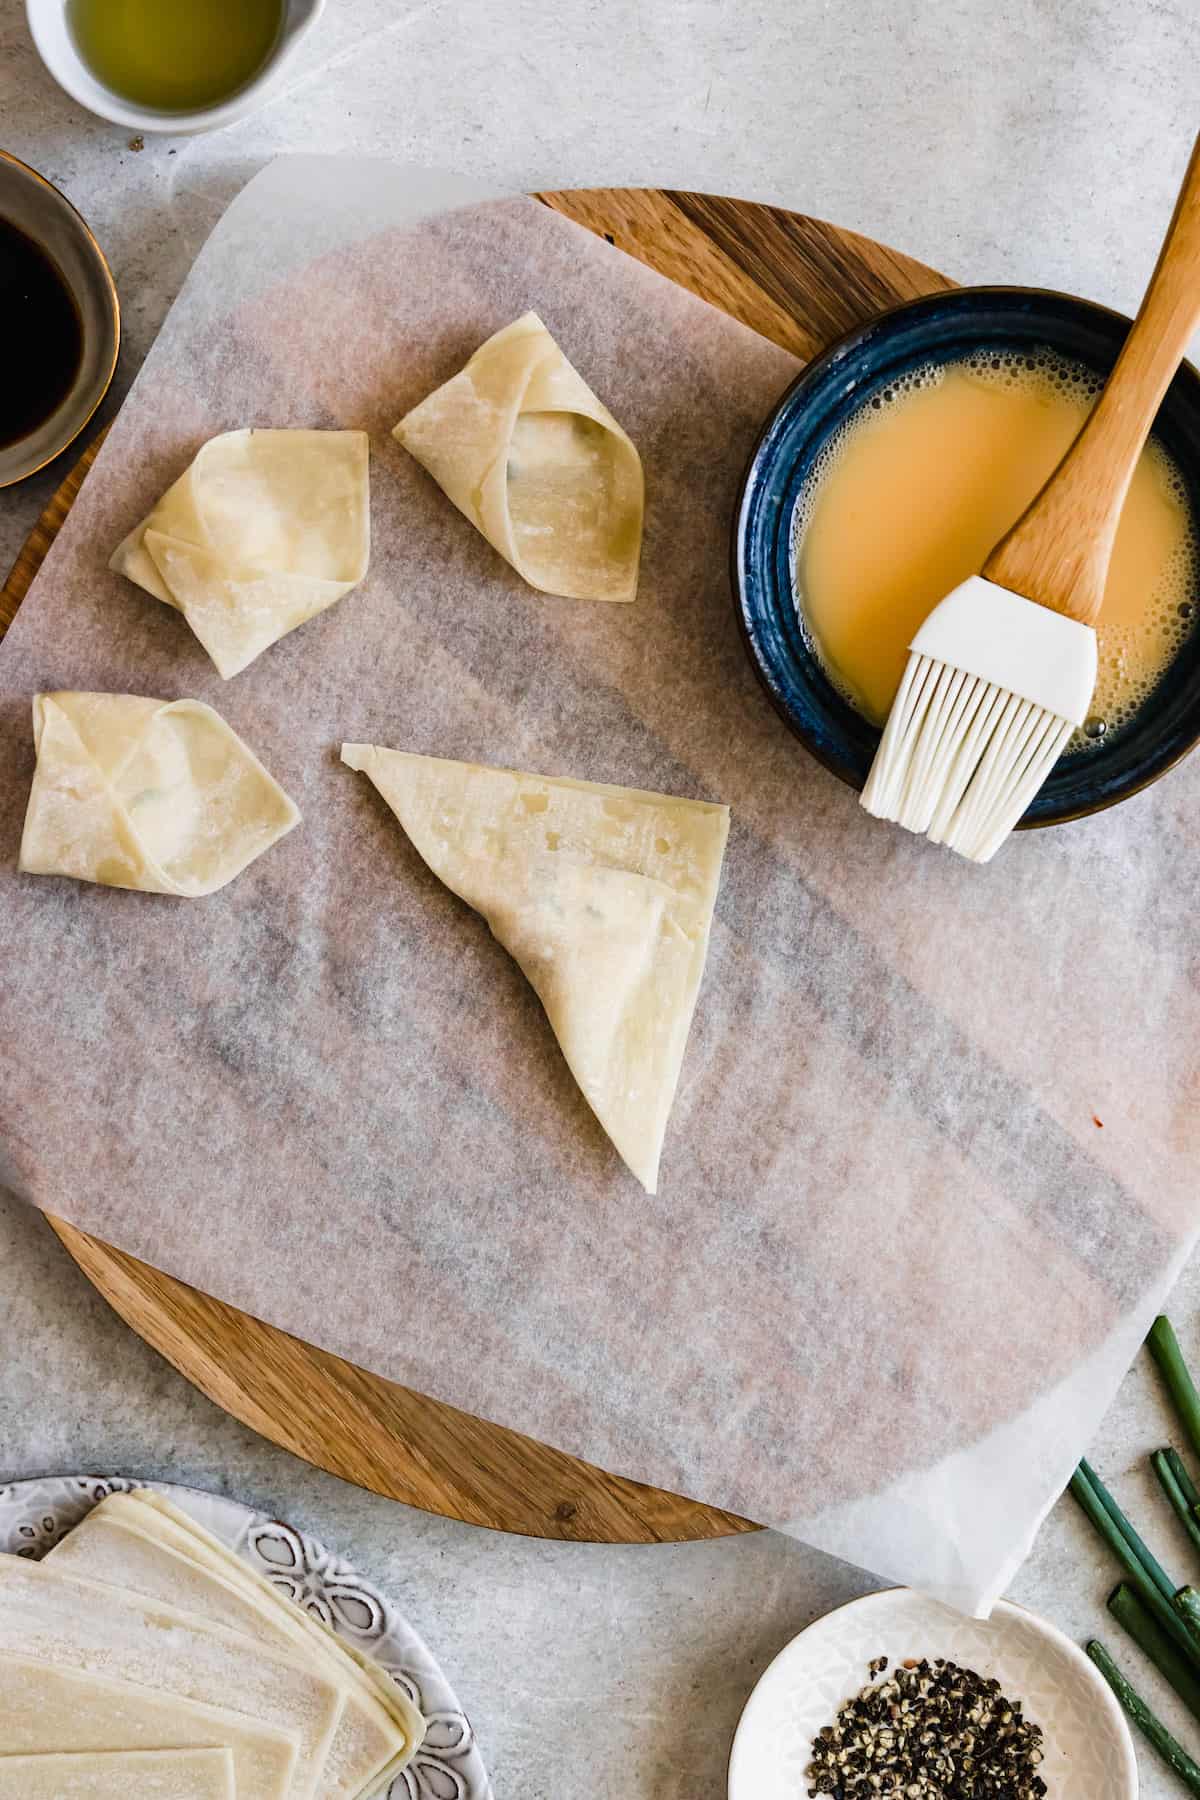 Filled wonton wrappers being shaped.